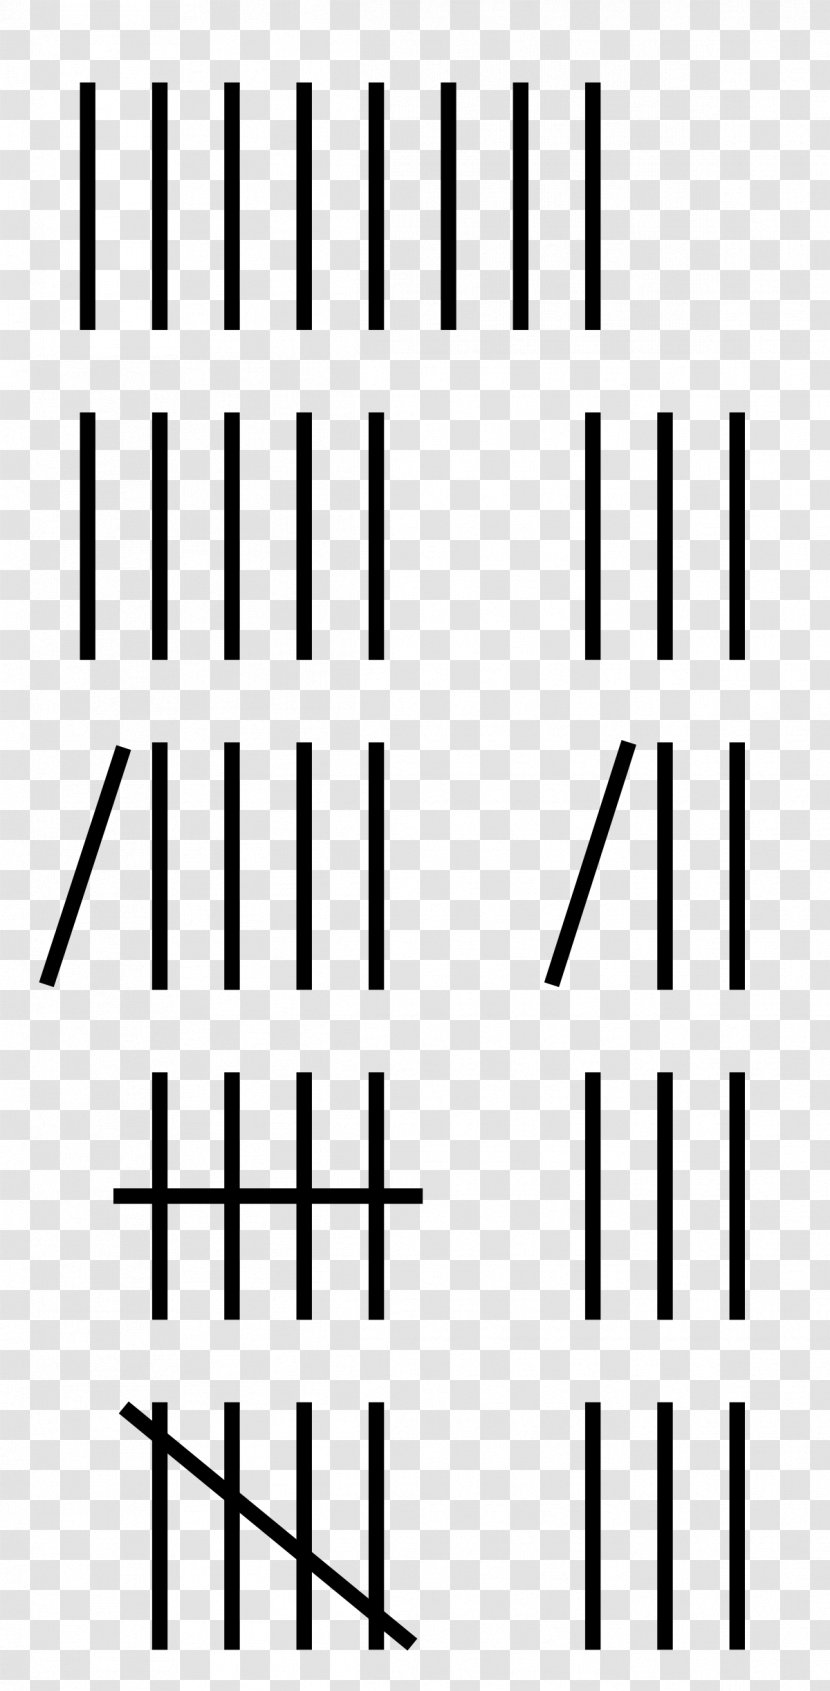 Tally Marks Unary Numeral System Counting Number - Flower - Frie Transparent PNG